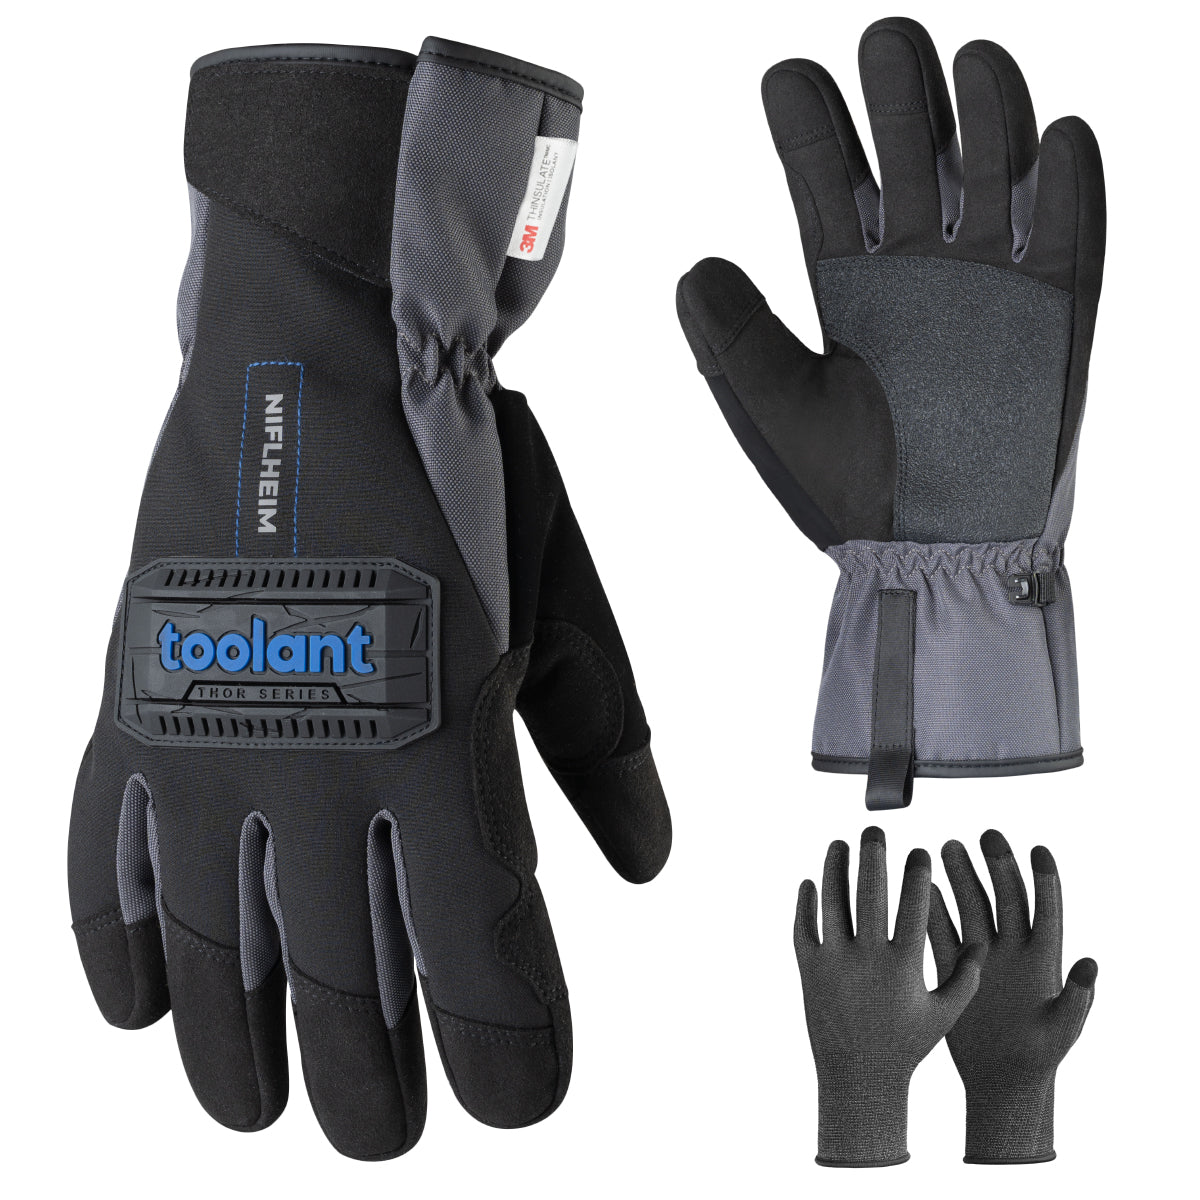 Cut Resistant Work Gloves, Level 4, Ultra Light and Thin, Fitting and  Flexible, Breathable, Firm Grip, Touch-Screen